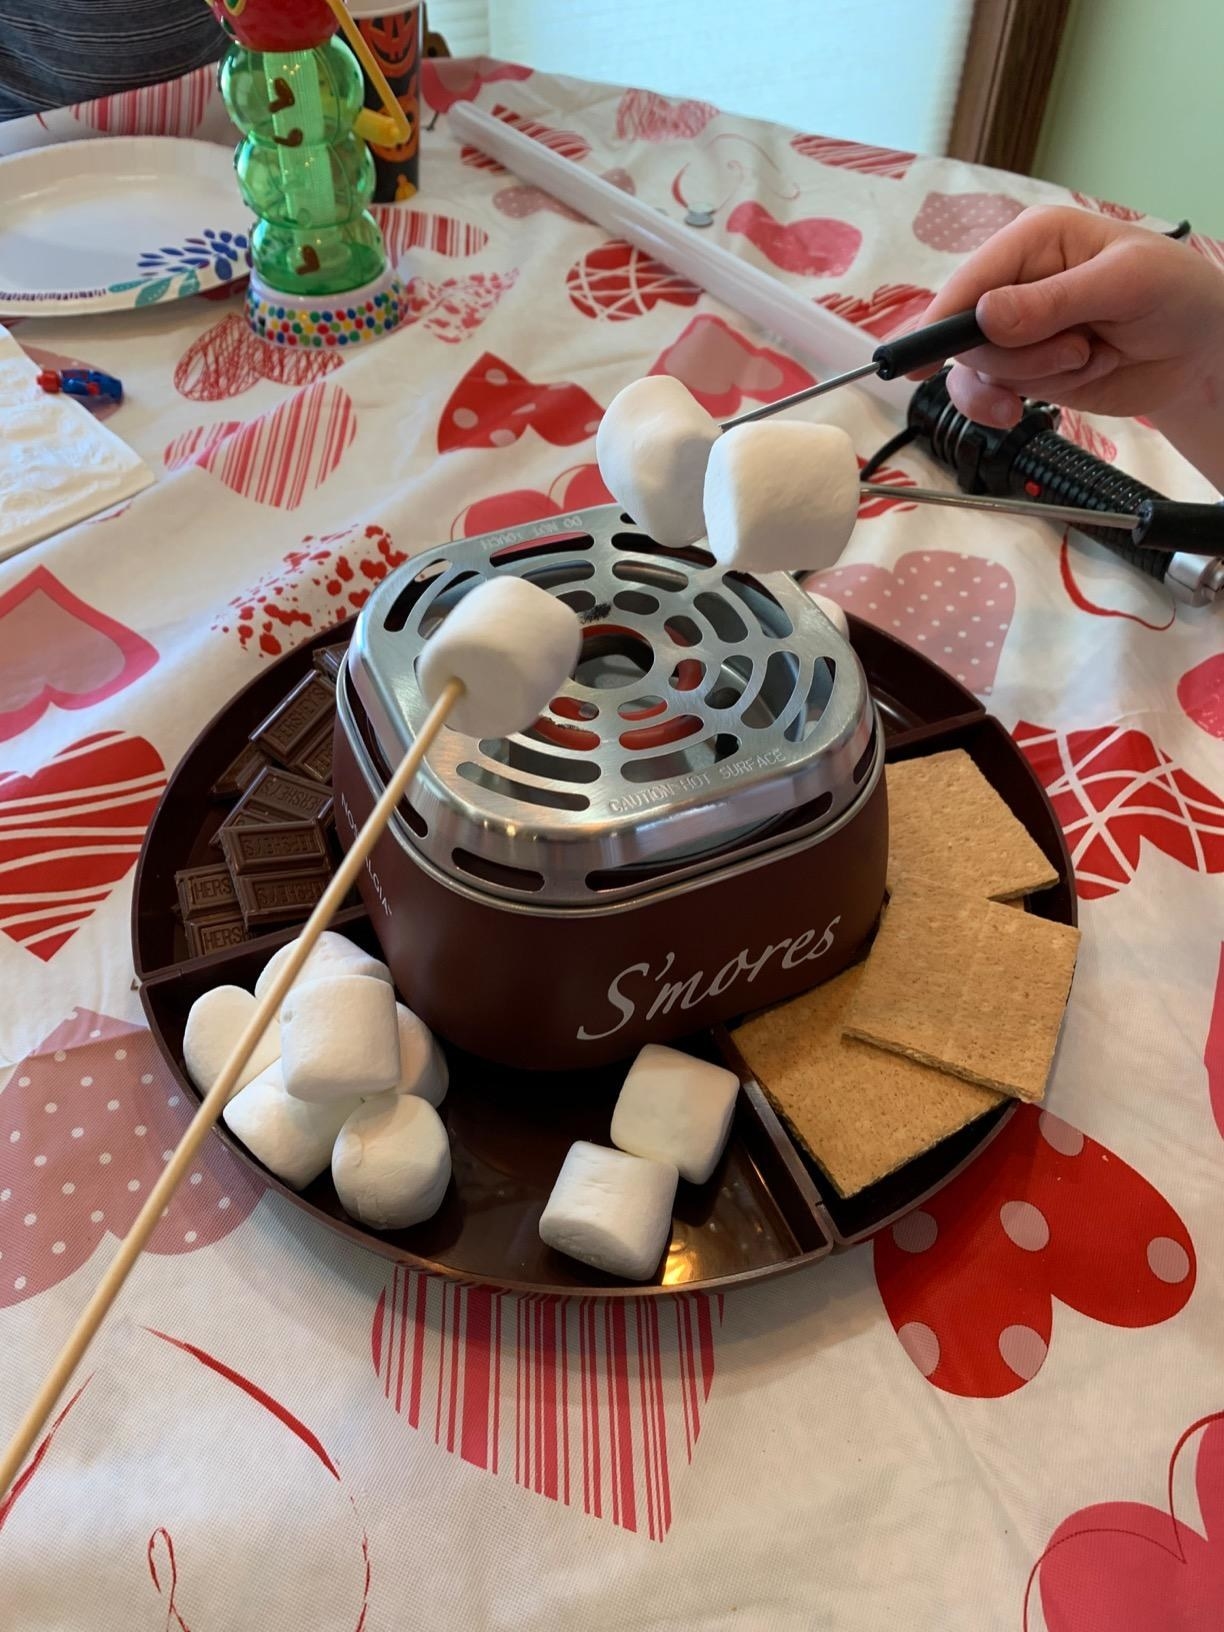 This Microwave S'mores Maker Is Perfect for Summer